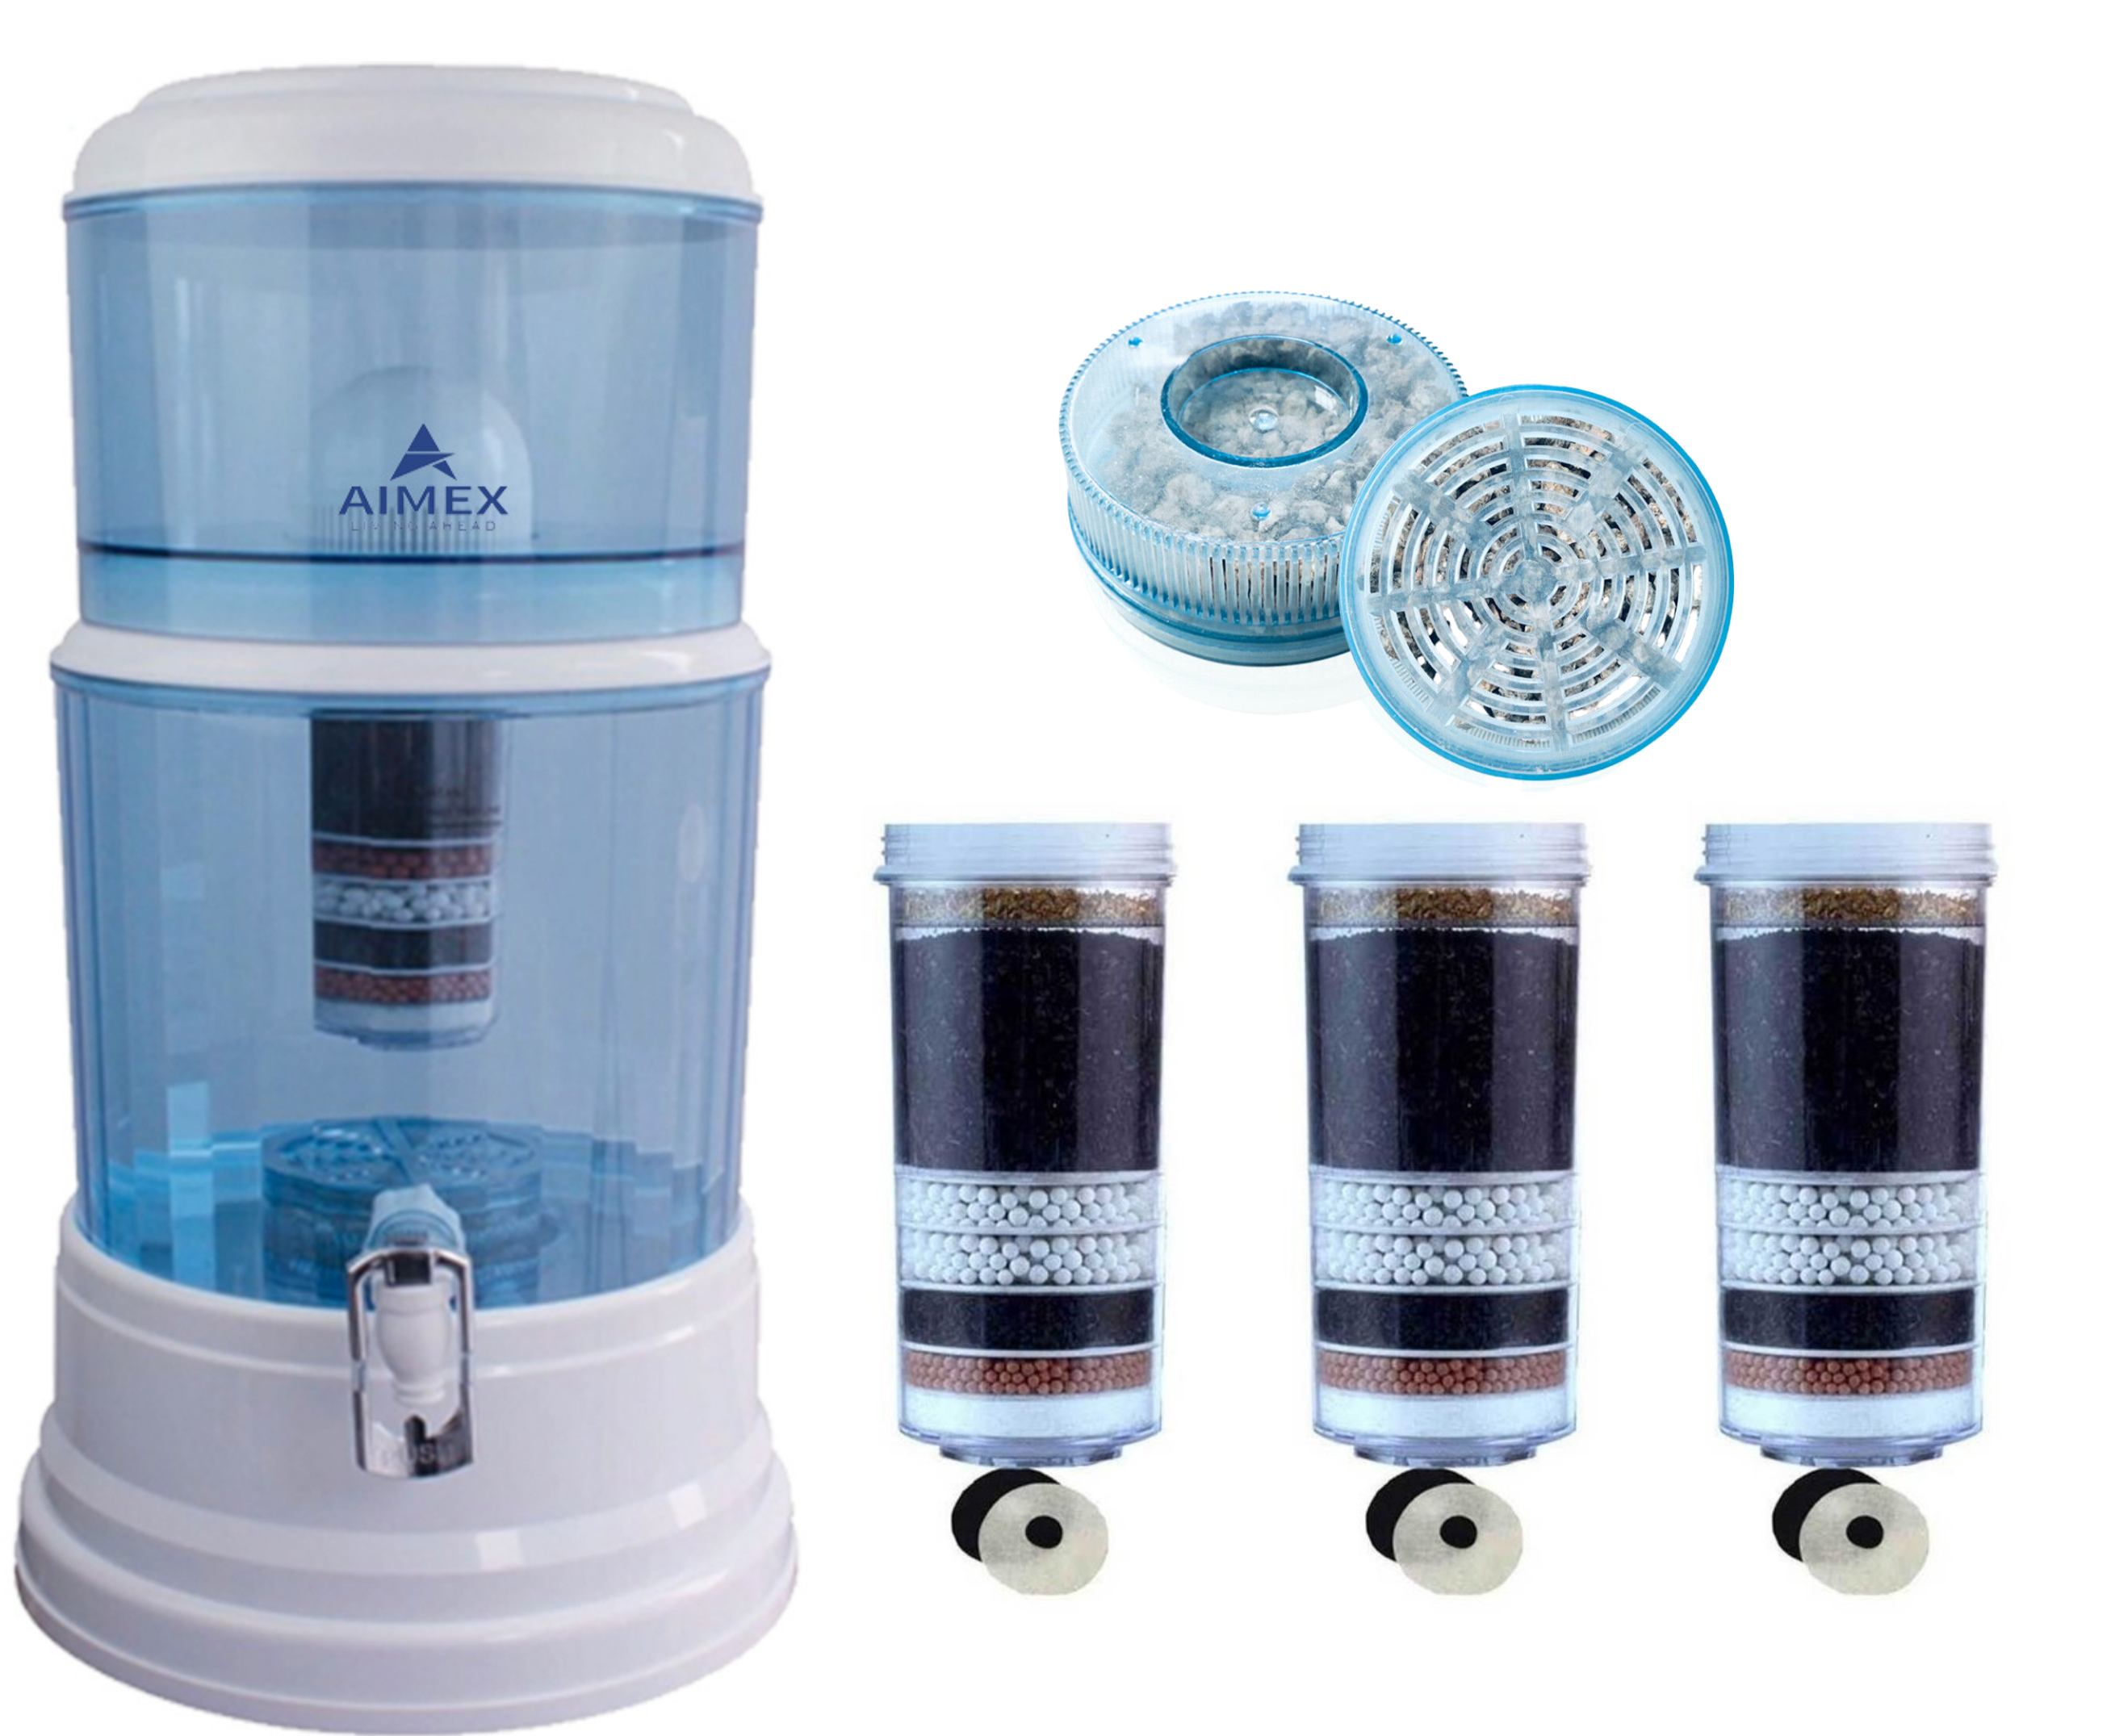 AIMEX WATER DISPENSER 20L BENCHTOP PURIFIER WITH 3 x 8 STAGE FLUORIDE REMOVAL WATER FILTERS